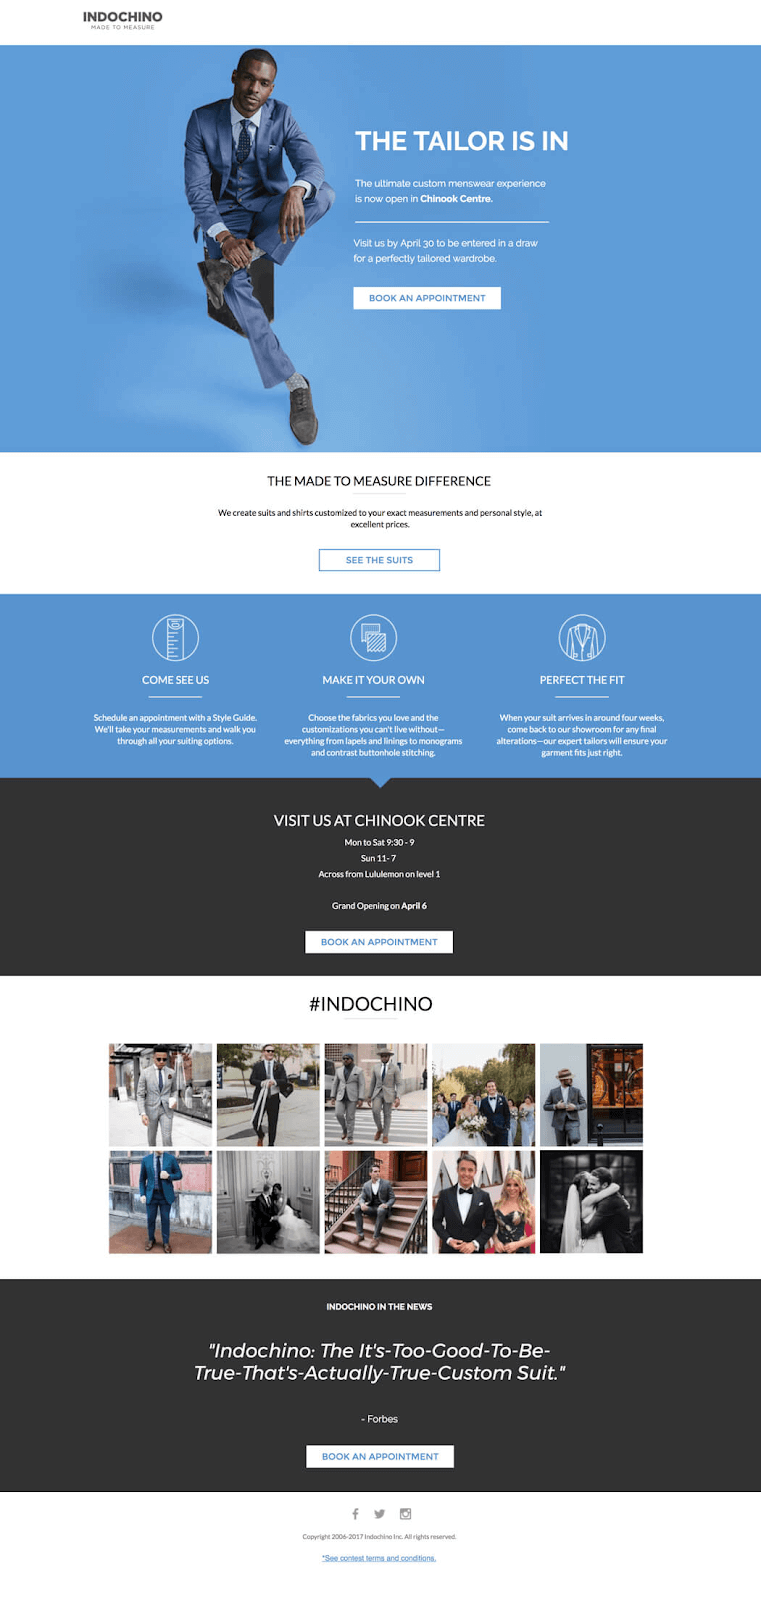 Indochino's landing page has a perfect color balance